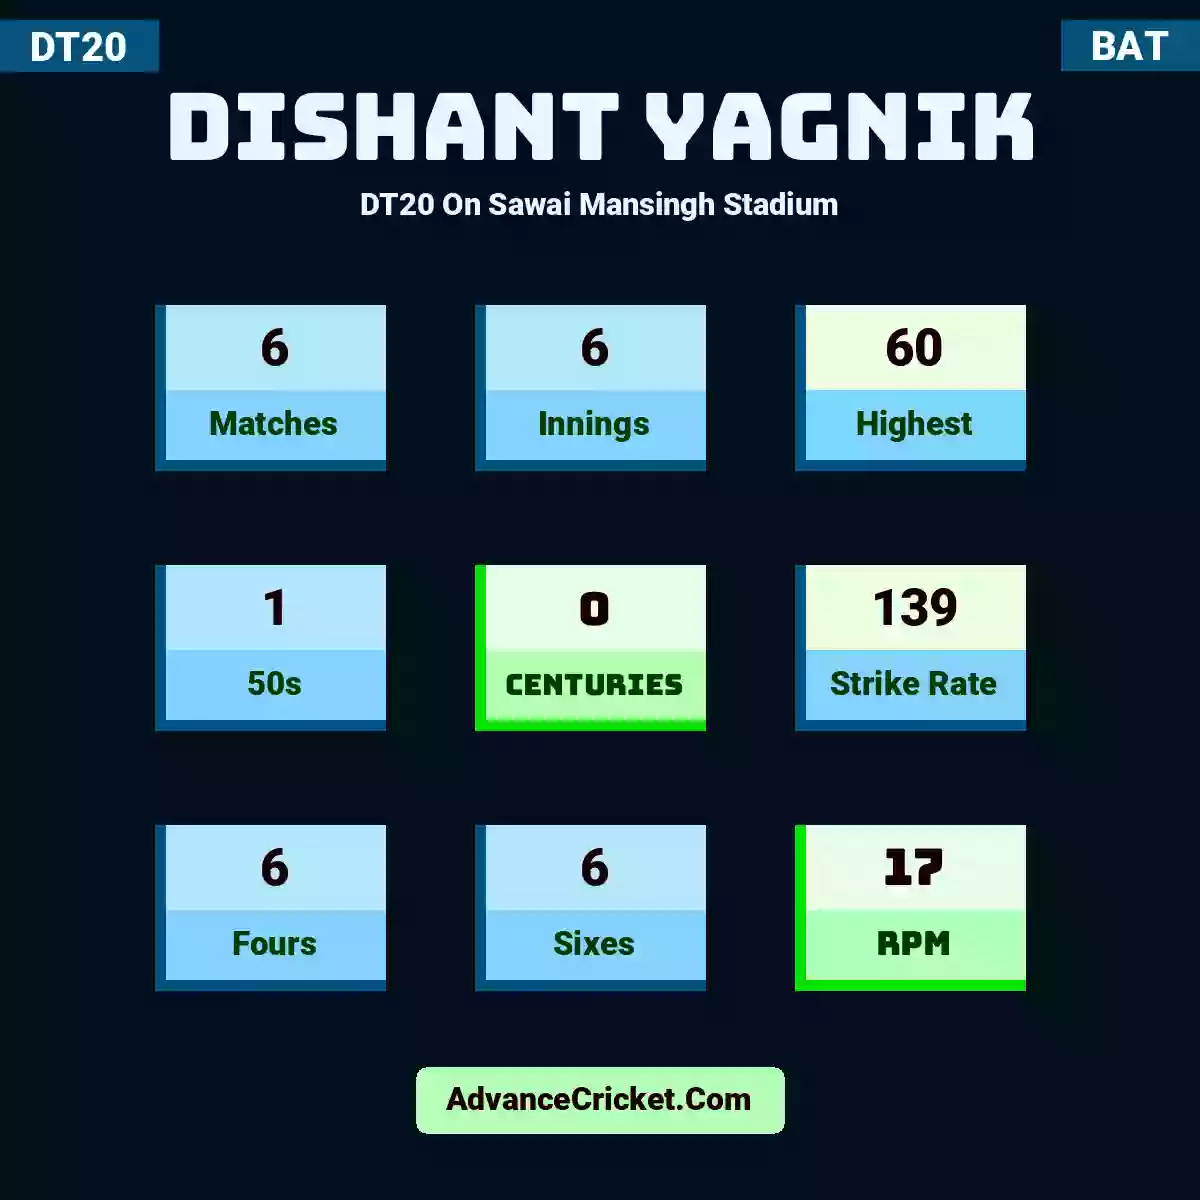 Dishant Yagnik DT20  On Sawai Mansingh Stadium, Dishant Yagnik played 6 matches, scored 60 runs as highest, 1 half-centuries, and 0 centuries, with a strike rate of 139. D.Yagnik hit 6 fours and 6 sixes, with an RPM of 17.